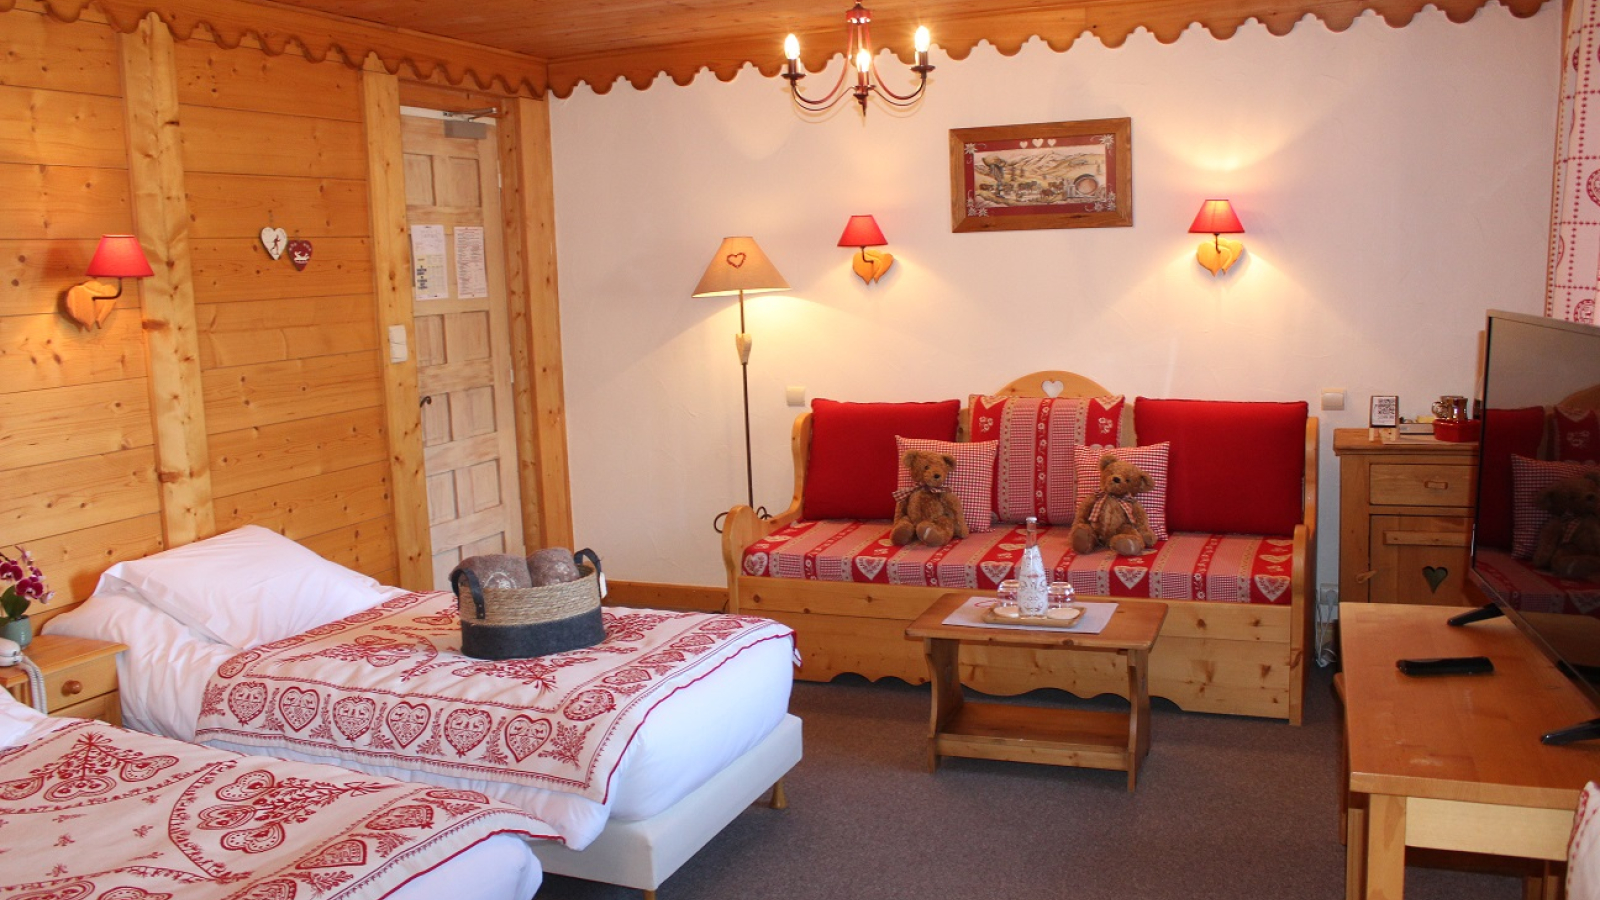 View of the red room with 2 beds